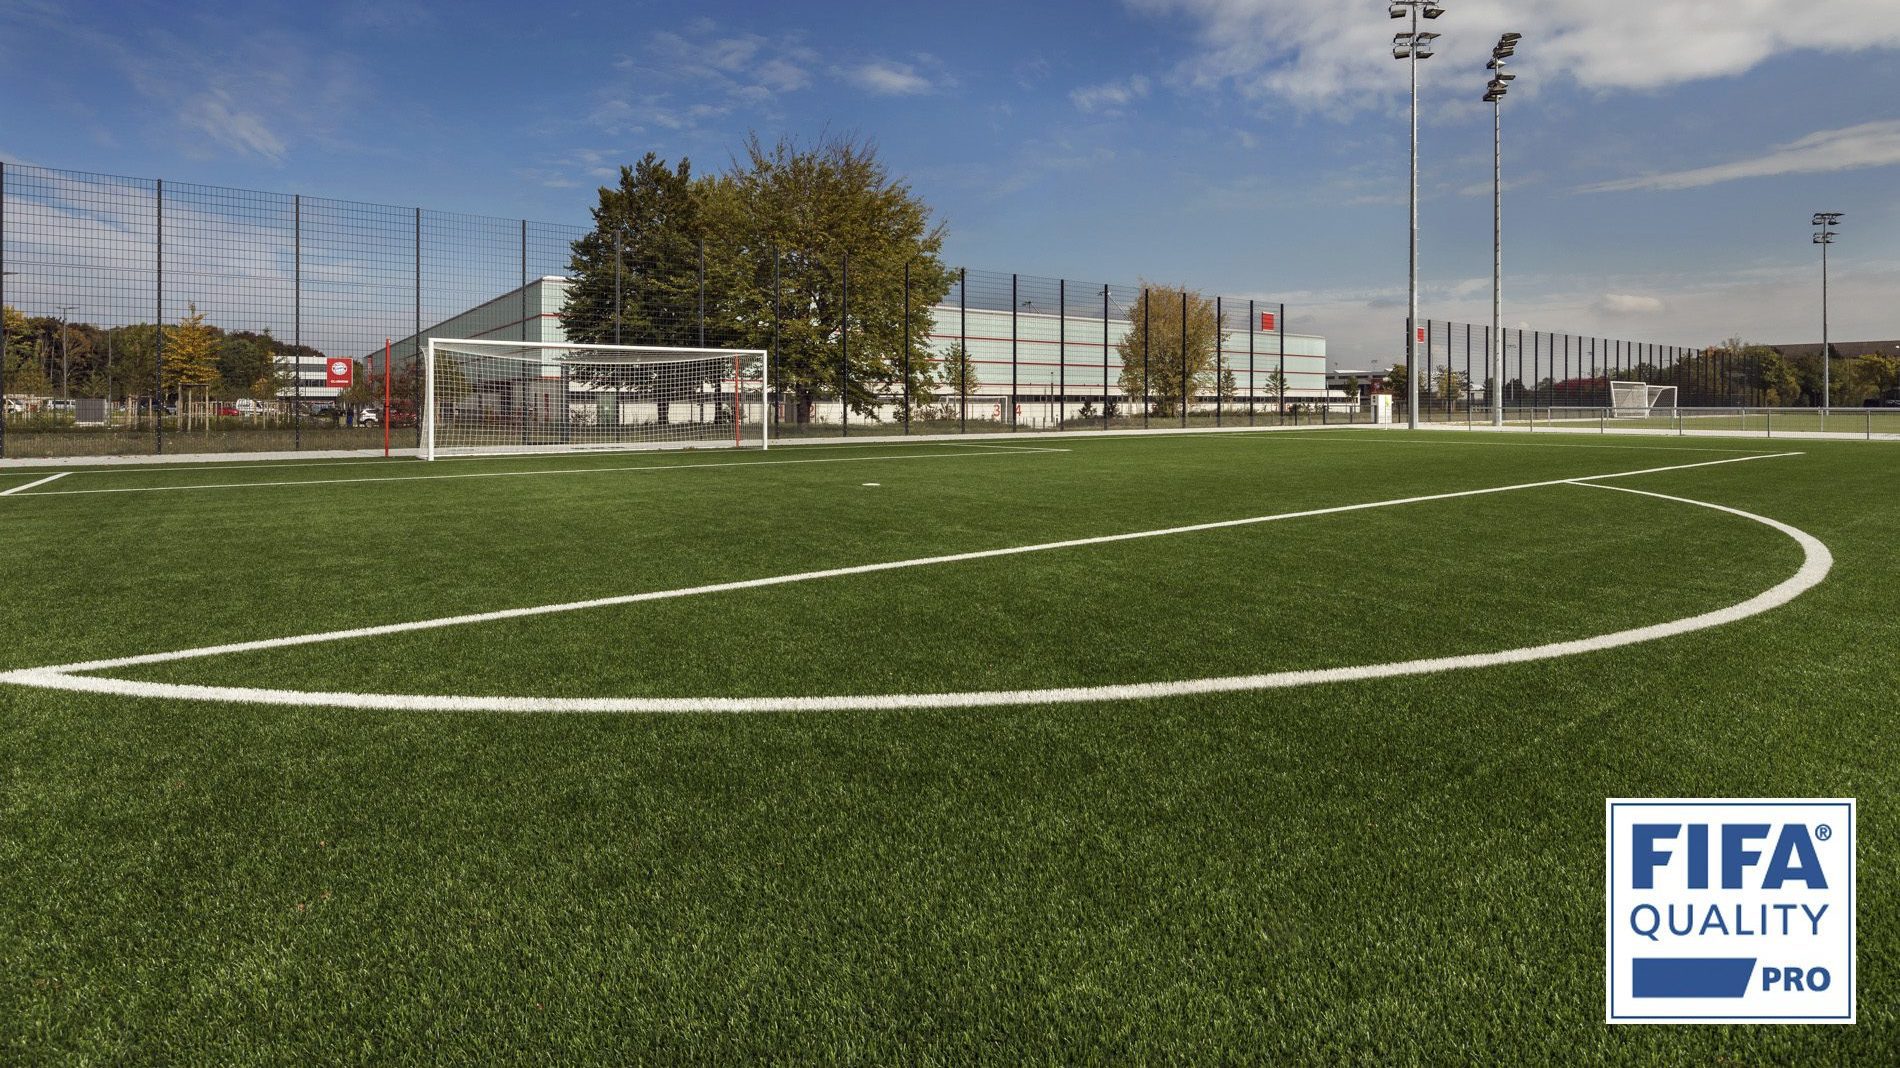 FIFA Quality Programme: The most important certification for artificial turf (2)